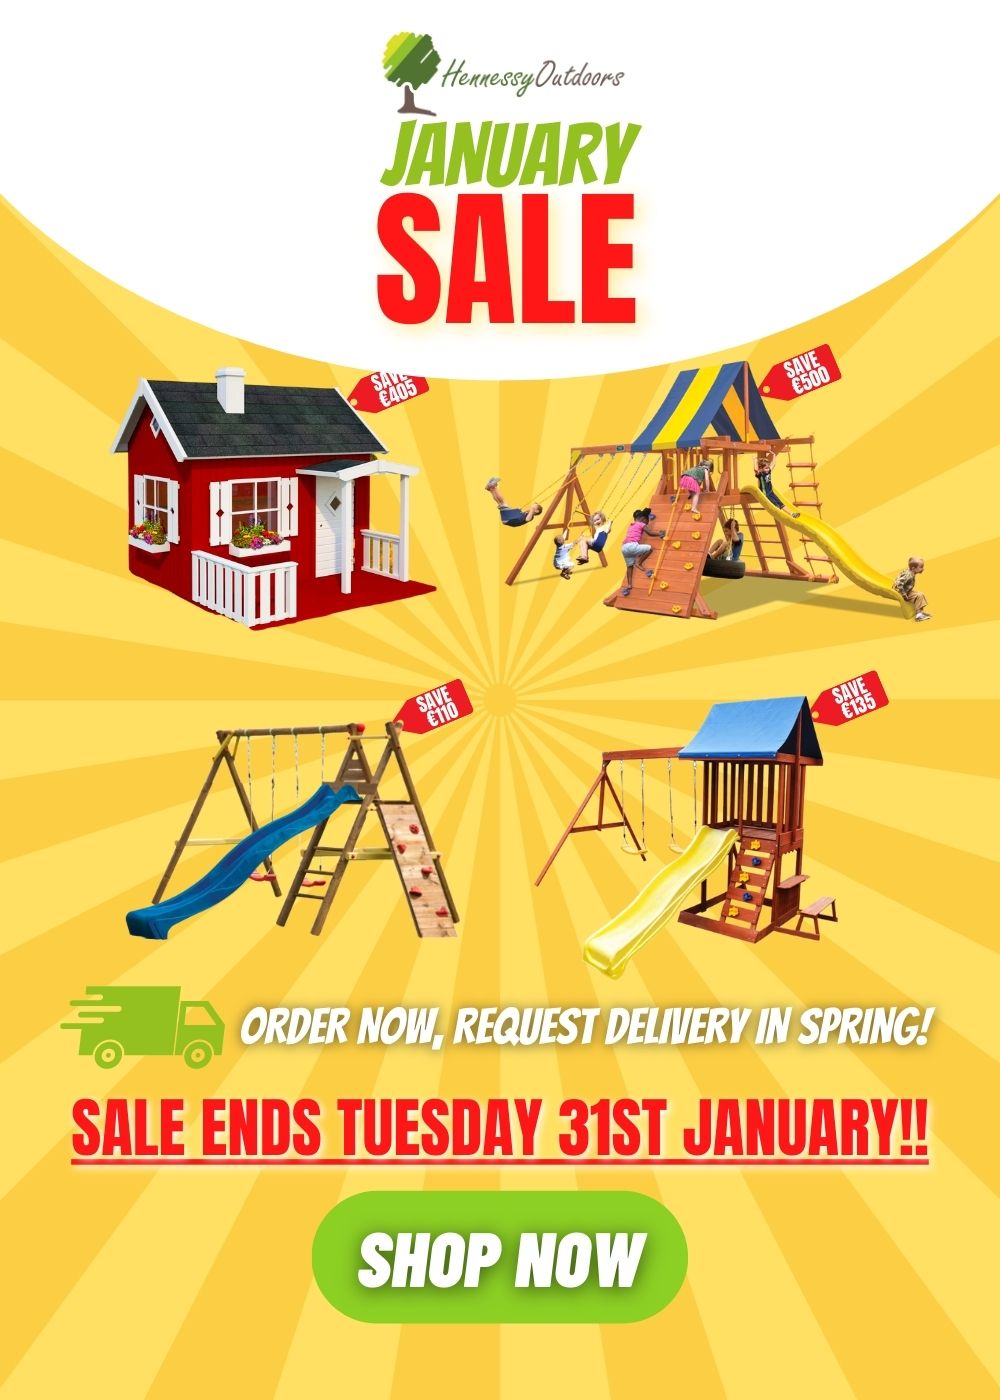 Hennessy Outdoors January Sale Banner